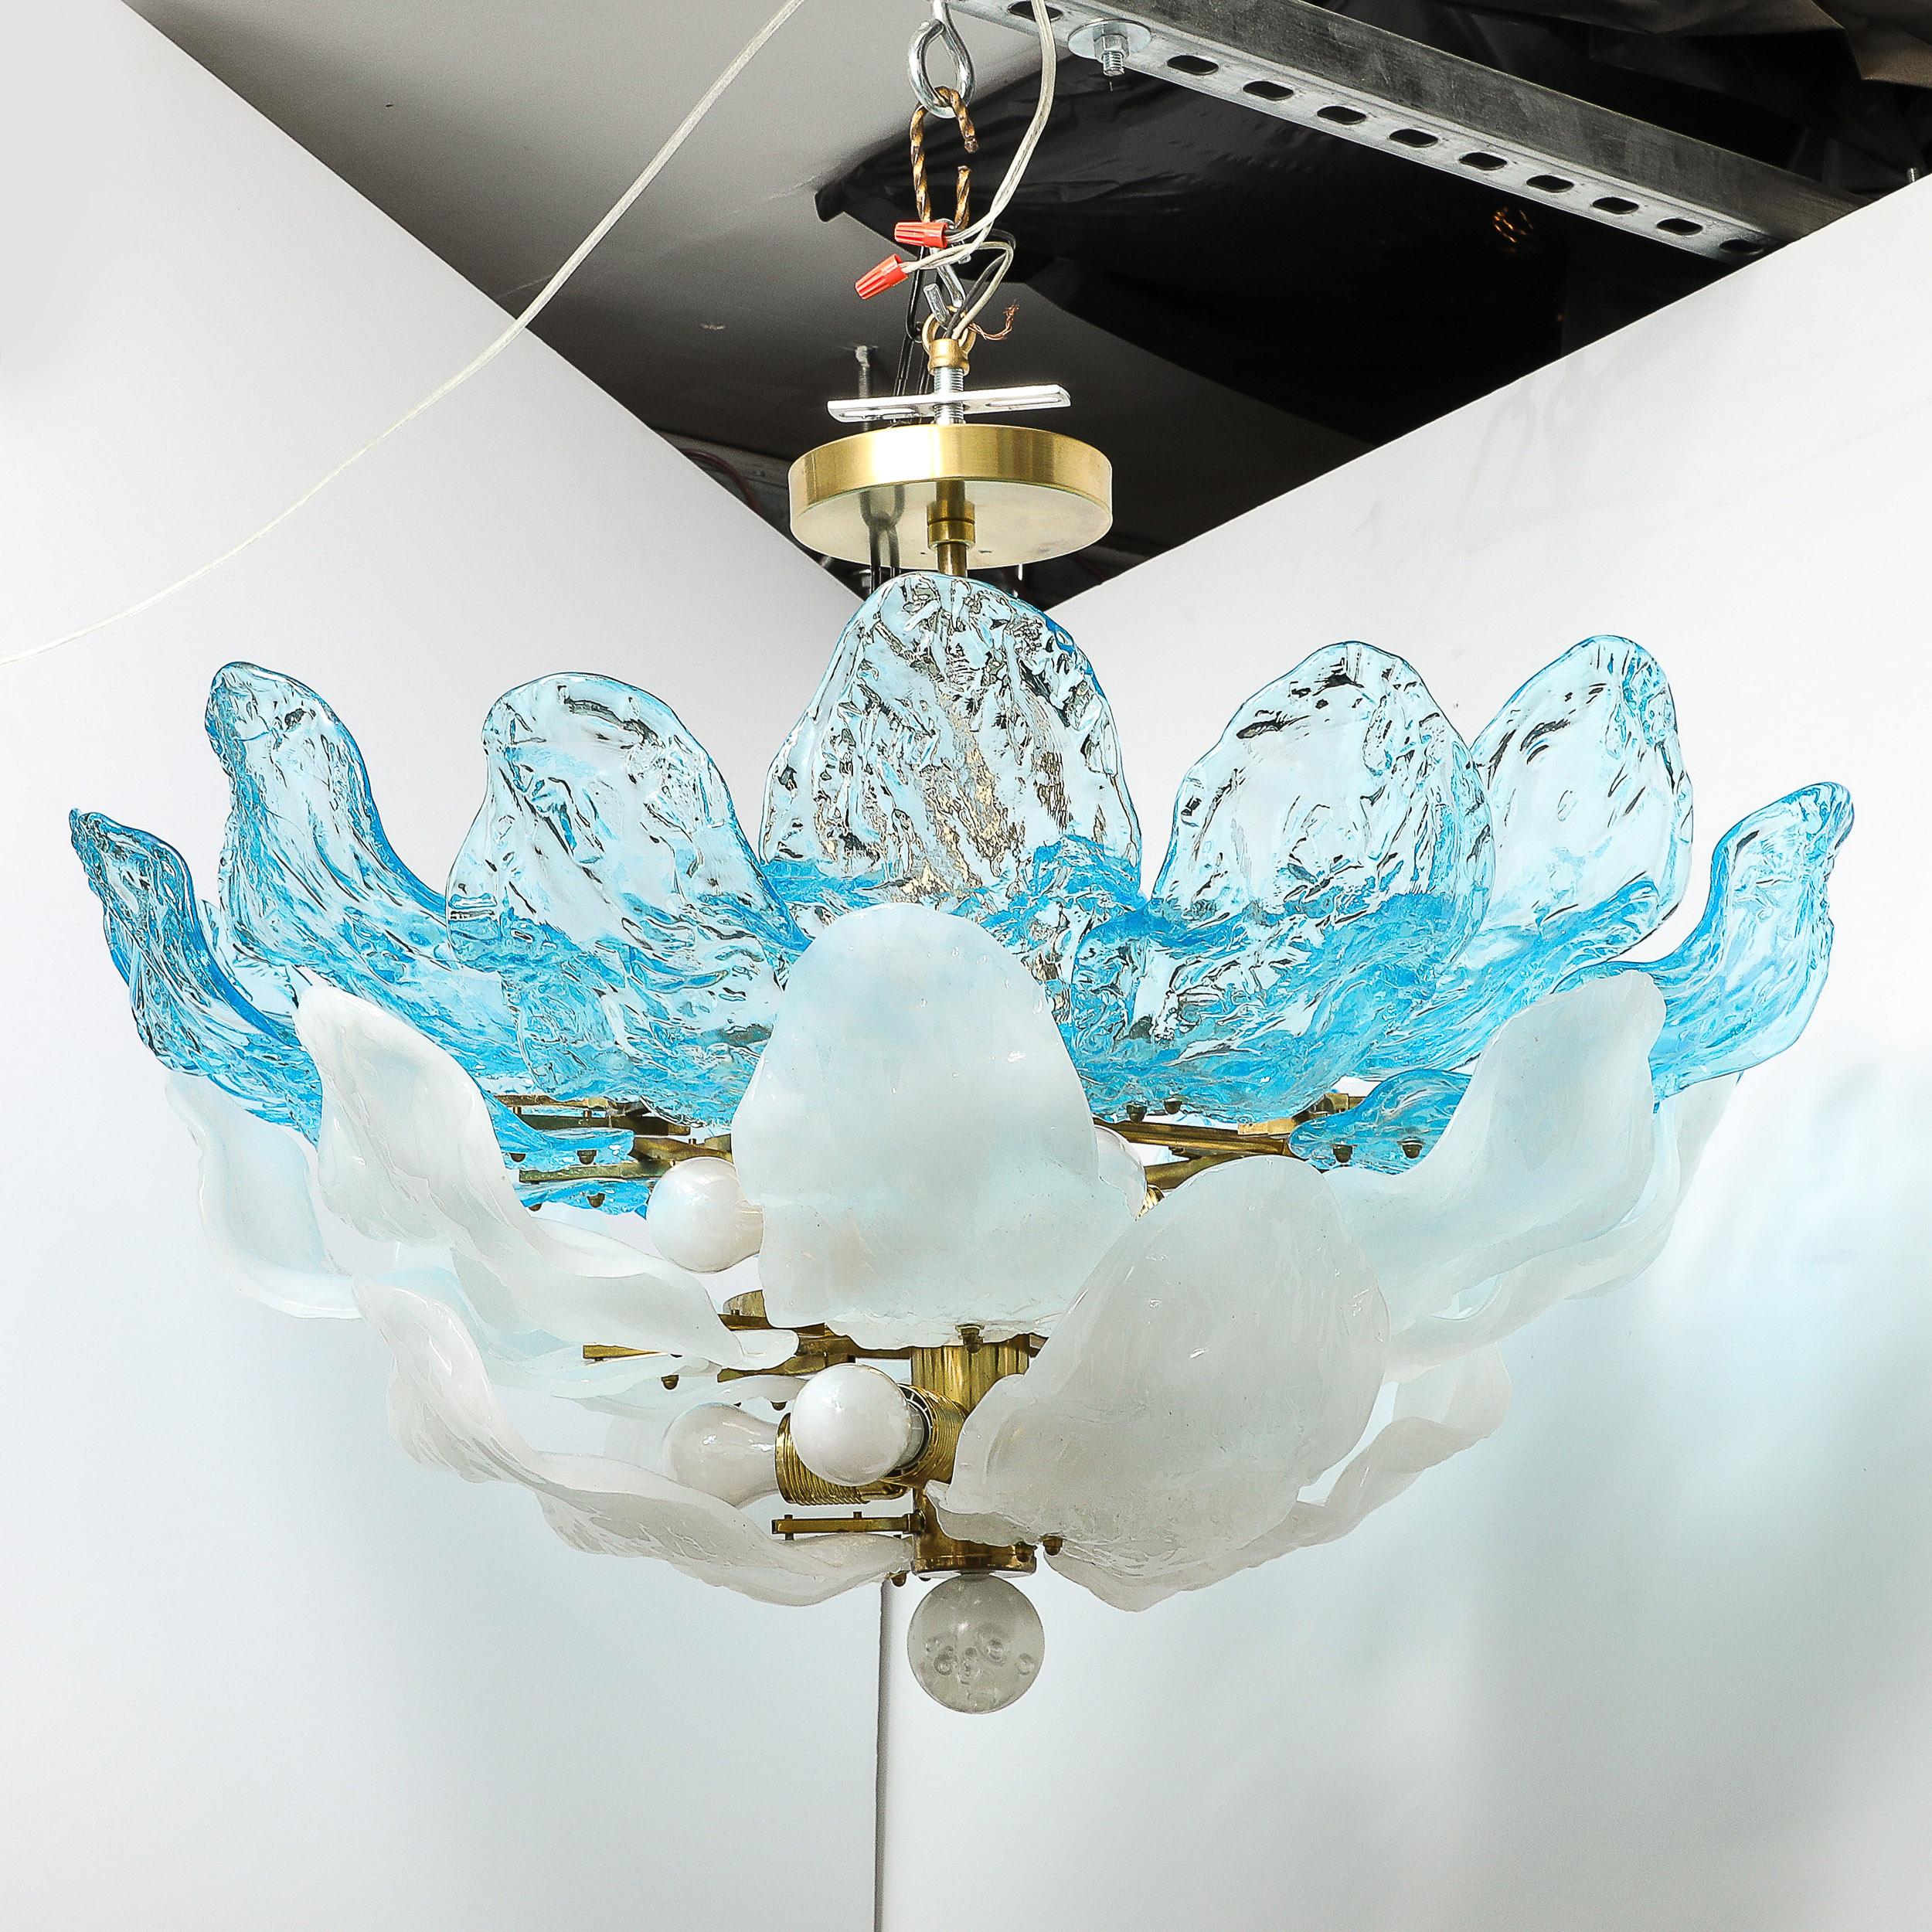 This gorgeous and impactful Mid-Century Modernist Hand-Blown Two-Tier Murano Glass Petal Chandelier in Cerulean Blue and White W/ Orbital Drop originates from Italy, Circa 1960. Formed in a multiplicity of petal form shades rendered in stunning hues